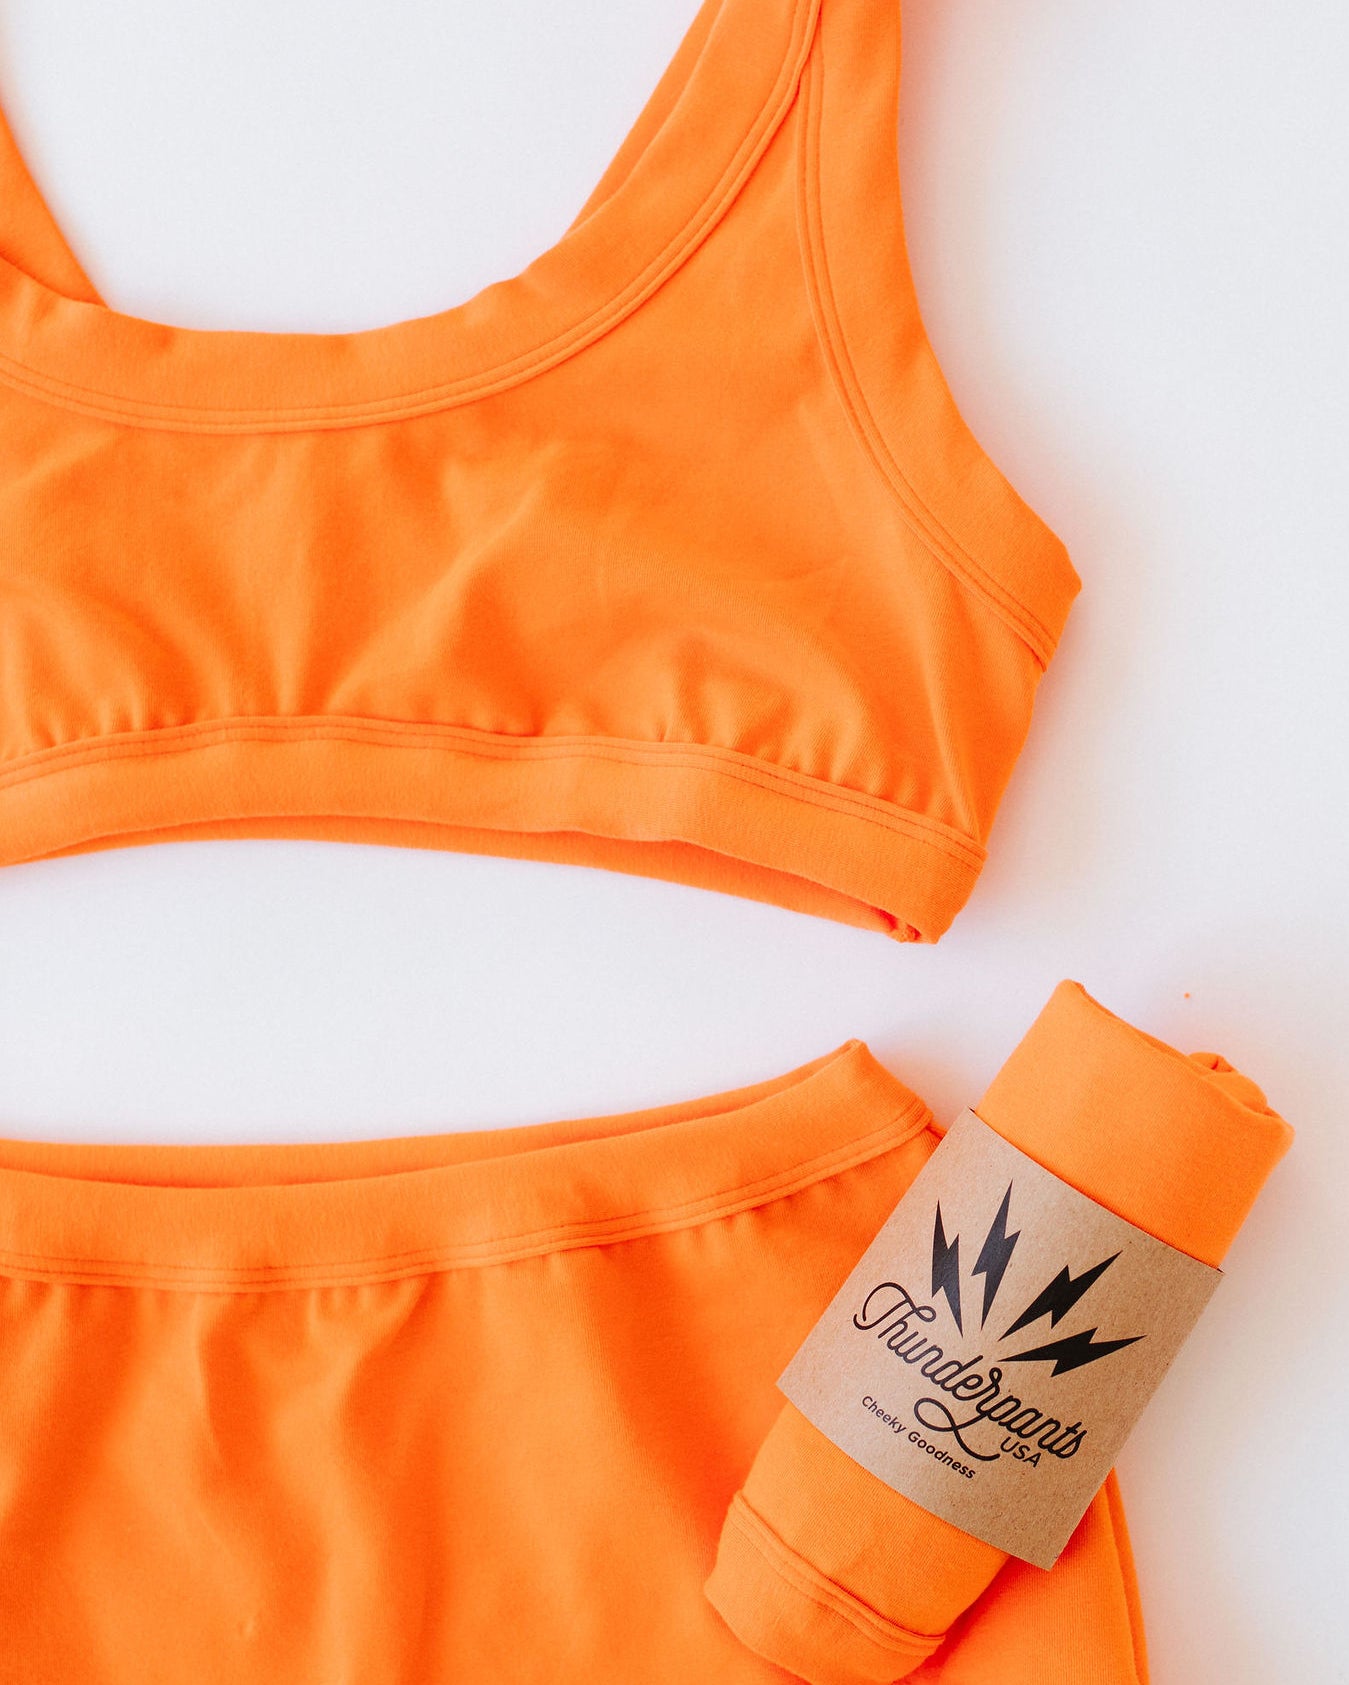 Close up of Thunderpants Sky Rise style underwear and Bralette in Oregon Sunstone orange color.